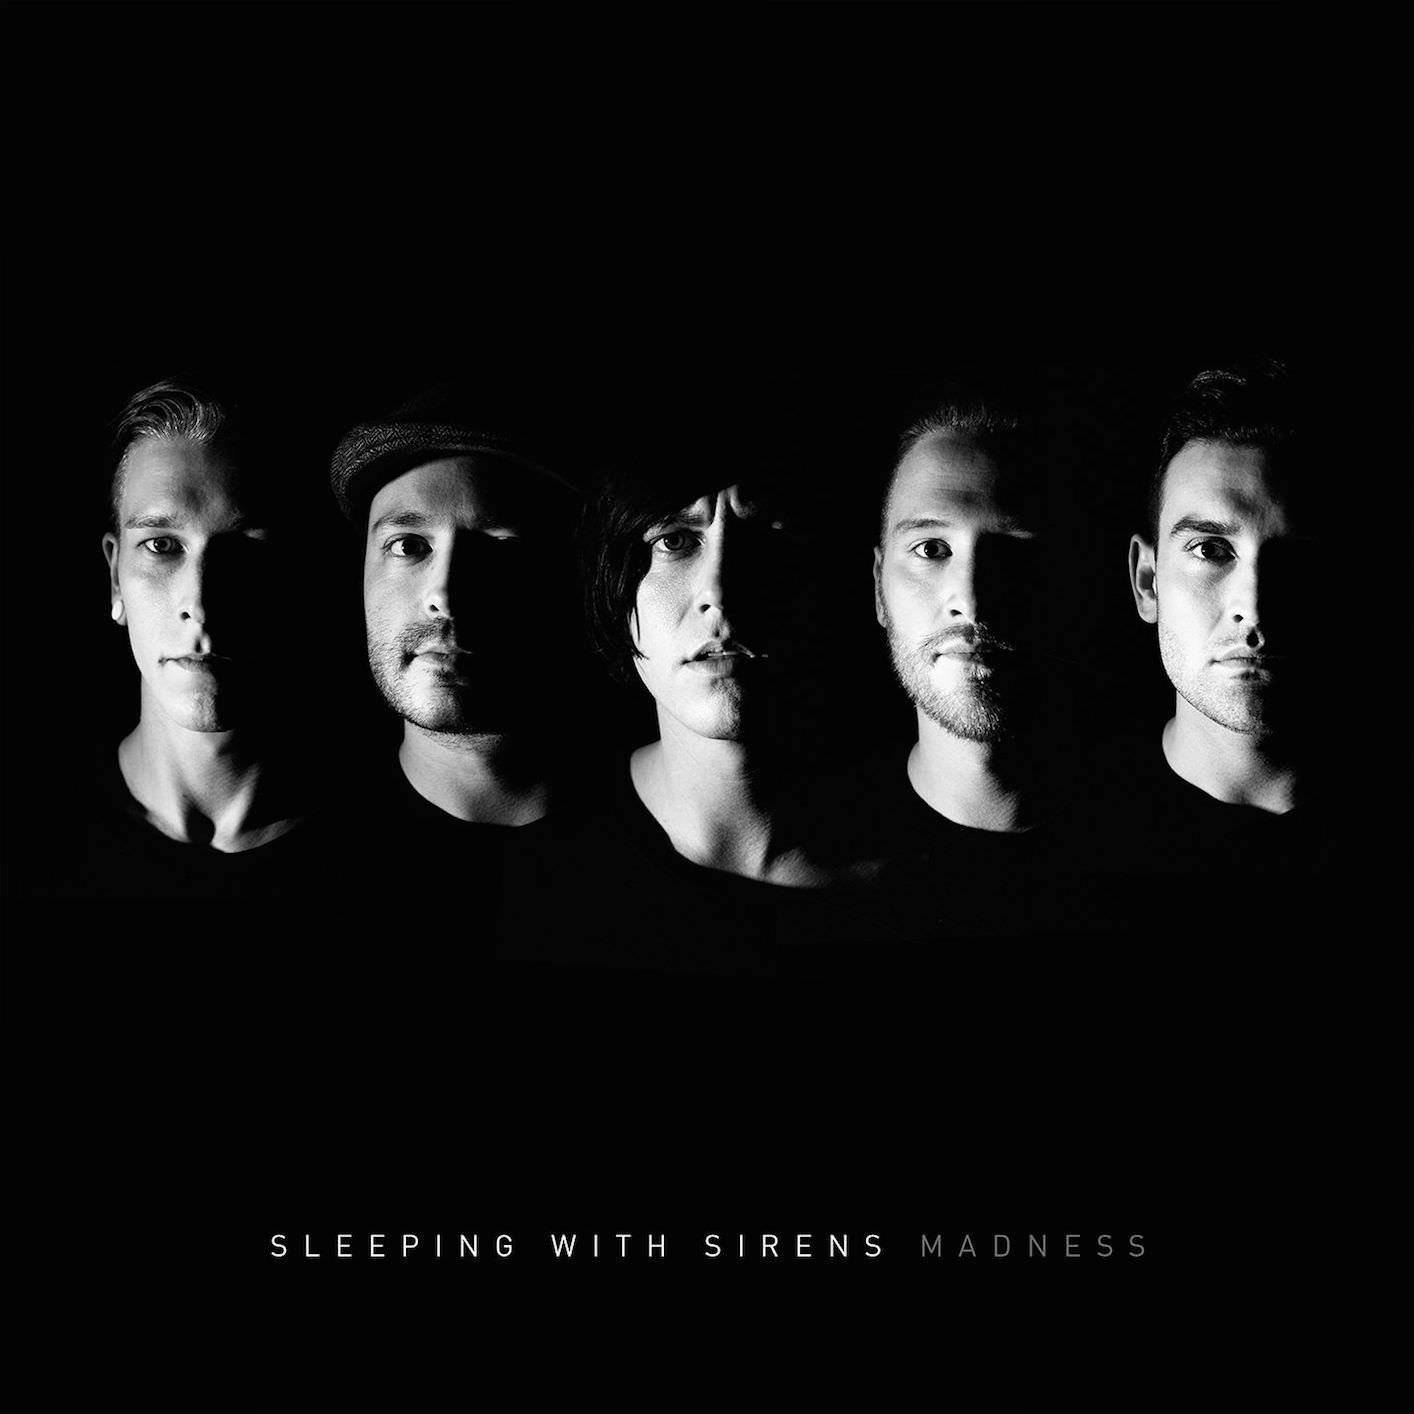 Sleeping With Sirens - Madness {Deluxe Edition} (2015) [HDTracks FLAC 24bit/44,1kHz]